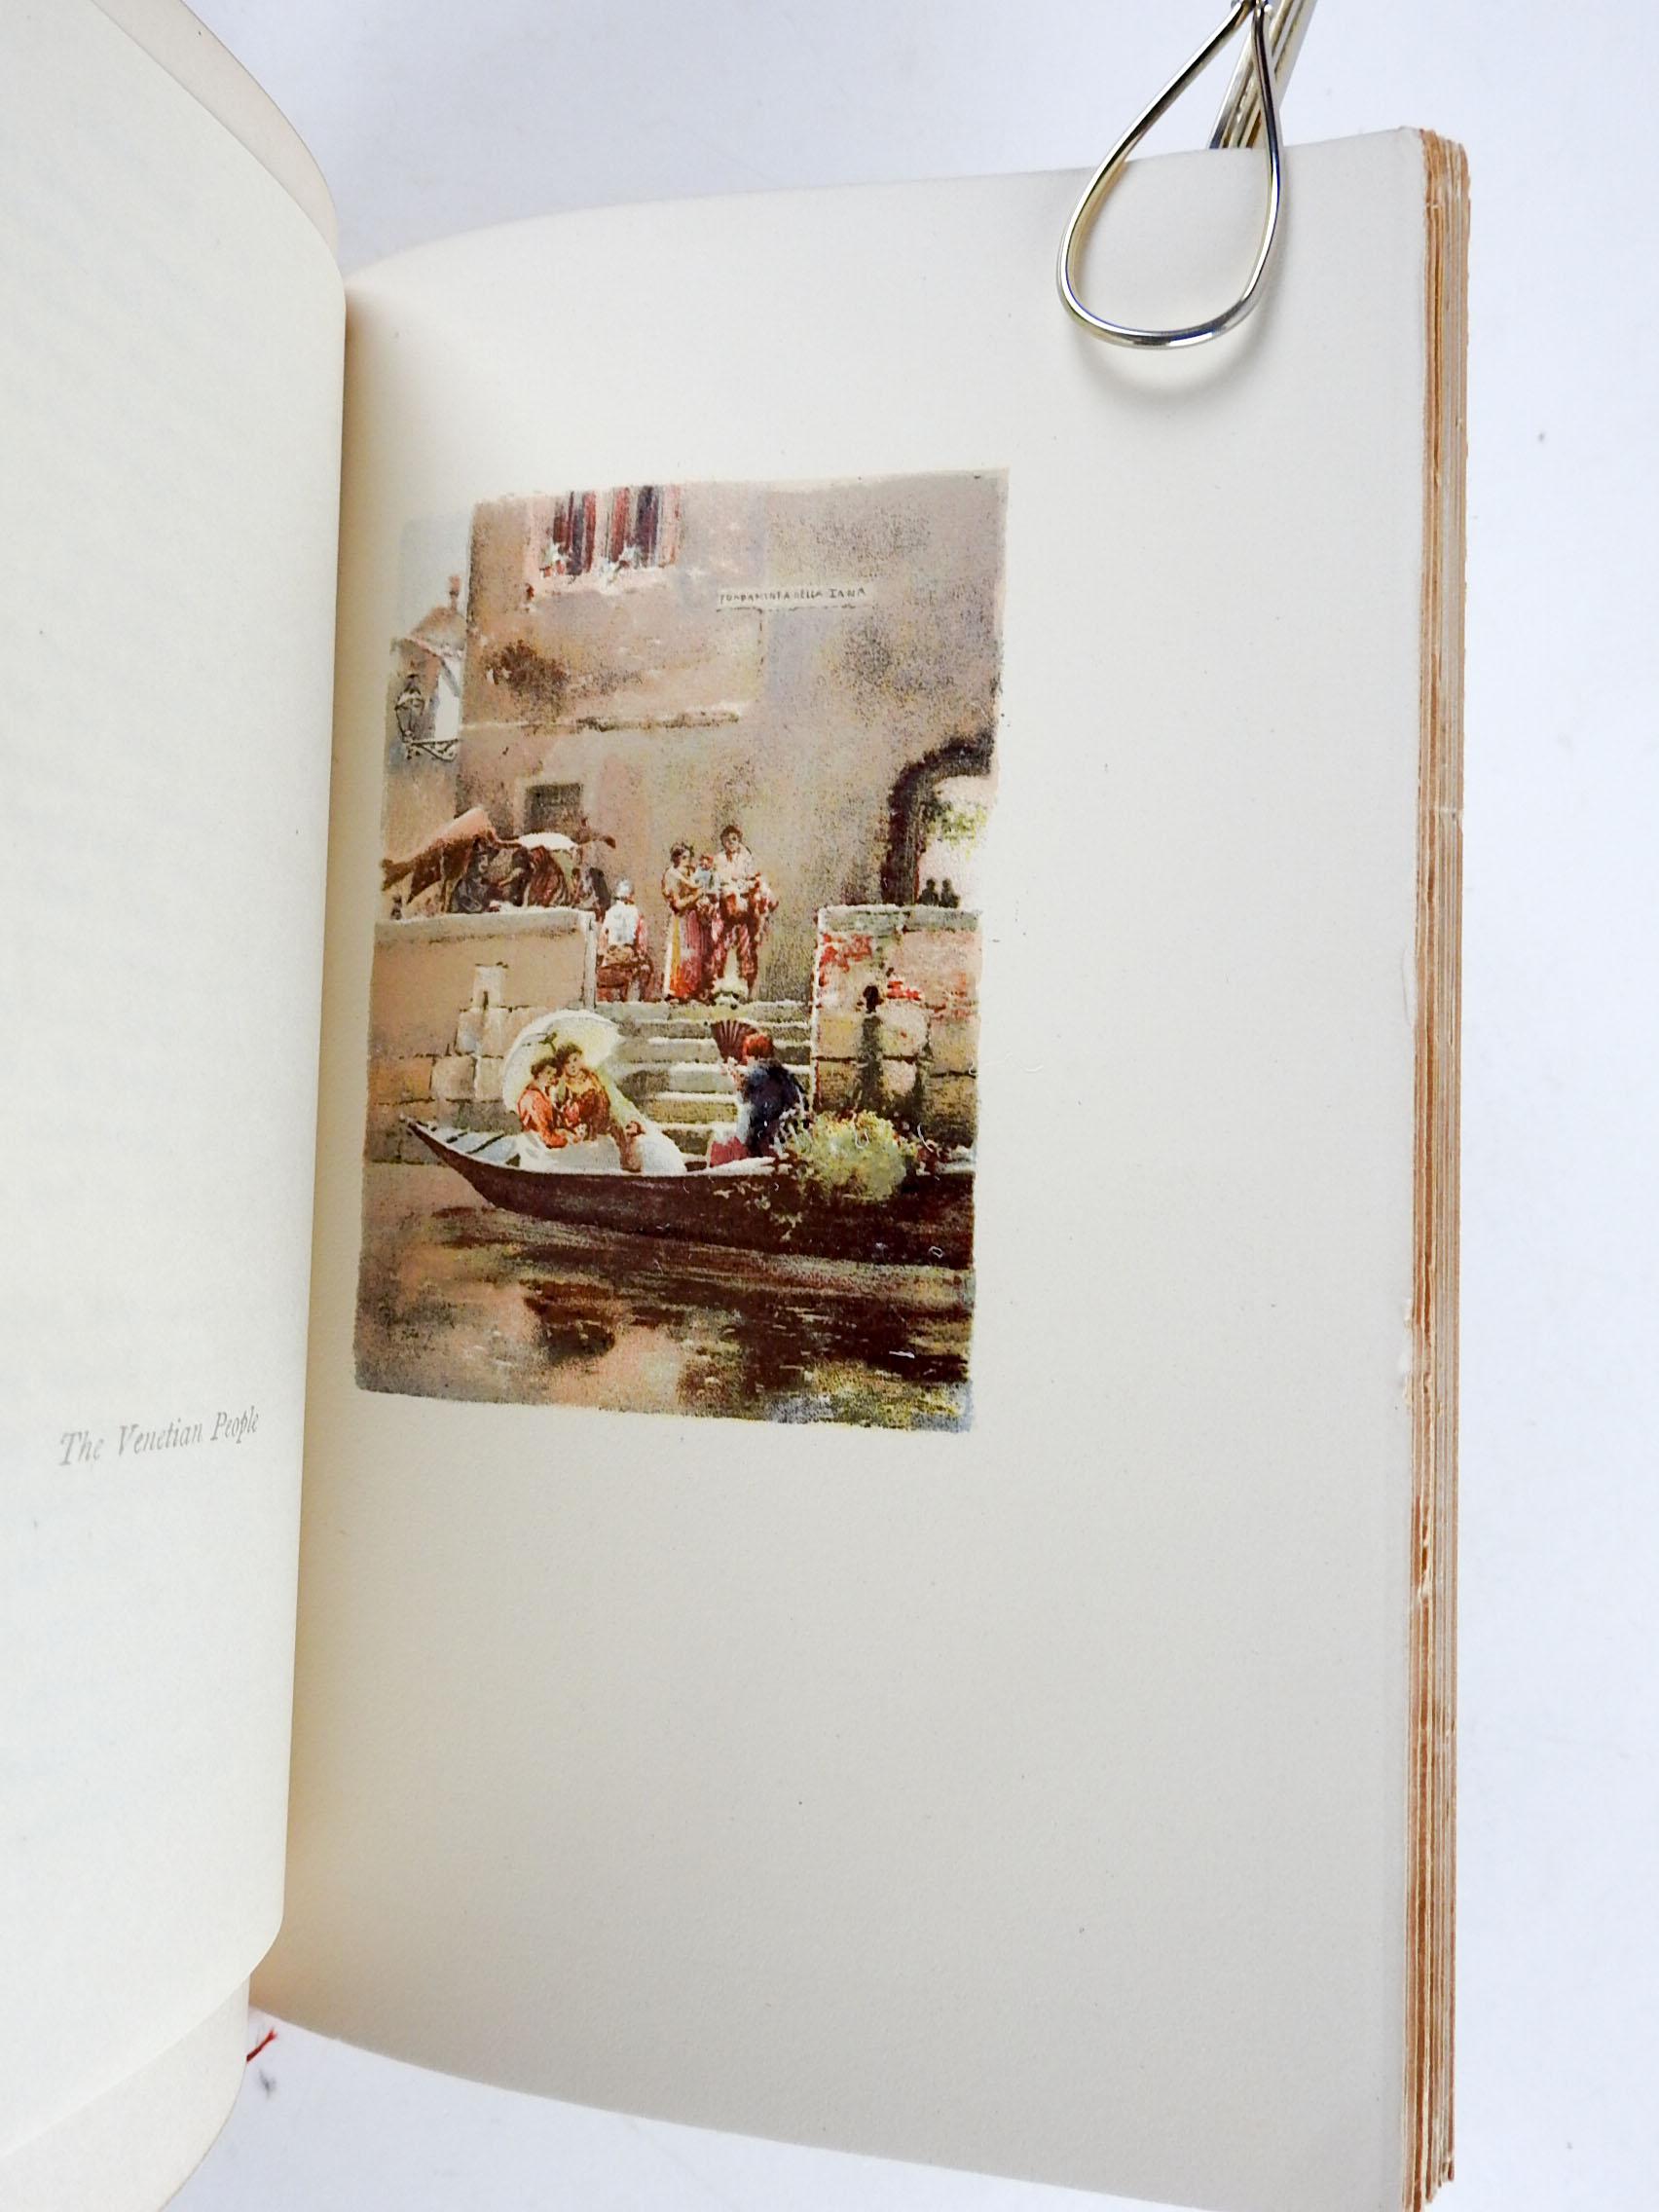 Venetian Life: Two Volumes with Illustrations from Original Water Color by William Dean Howells. Houghton Mifflin, Boston, 1892. Illustrated with color lithographs, by Childe Hassam, Ross Turner, F. Hopkinson Smith and Rhoda Holmes Nicholls. Cream